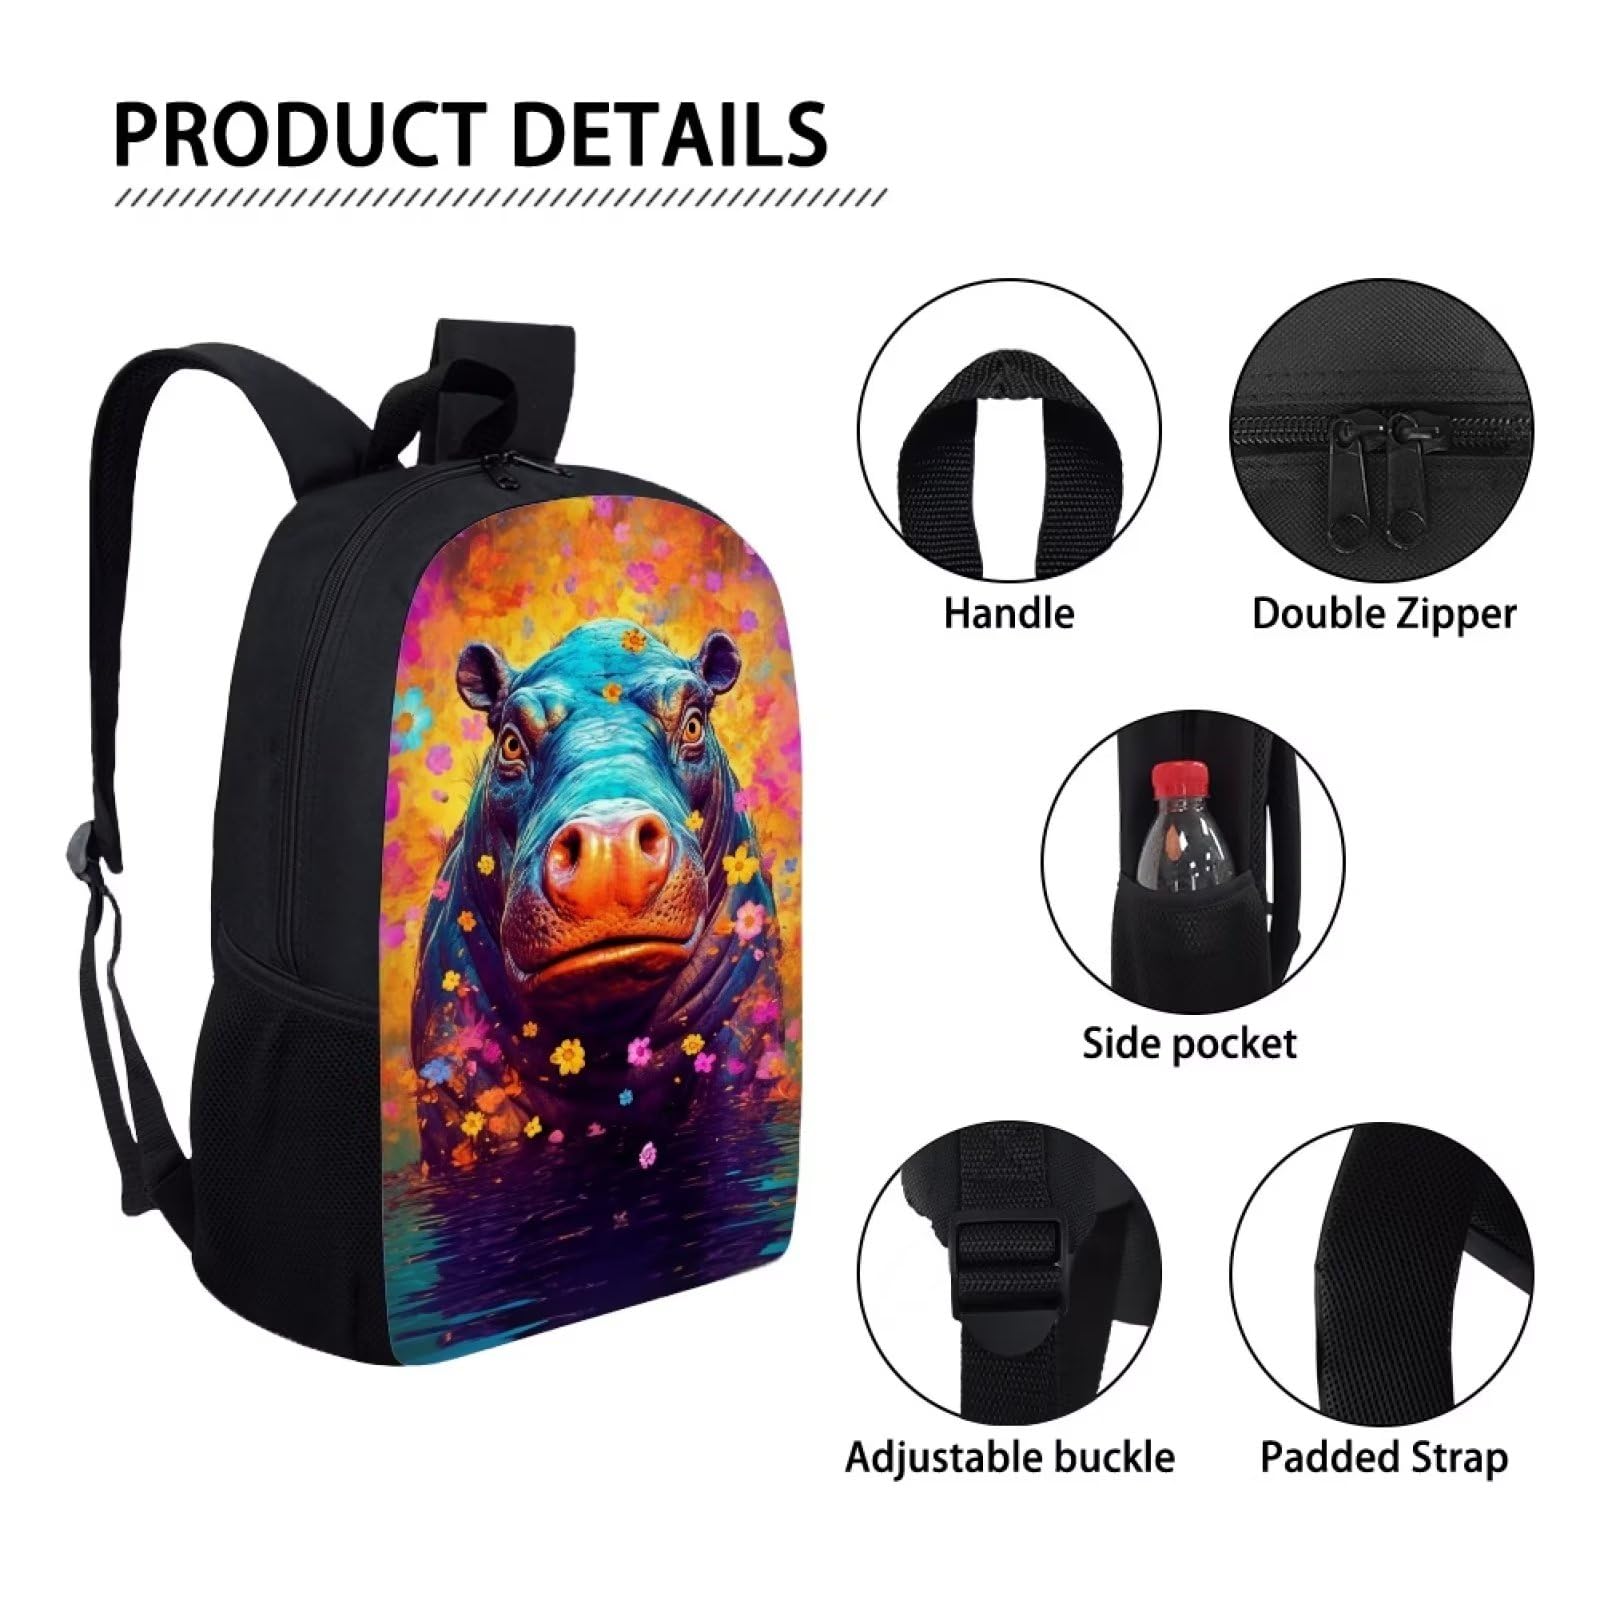 Kids Cool Animal Backpack Black Aesthetic Personalized Funny Floral Hippo School Backpack for Boys Girls Padded Back & Straps Comfy Lightweight Cute Bookbag 17 Inch Student Basic Daypack